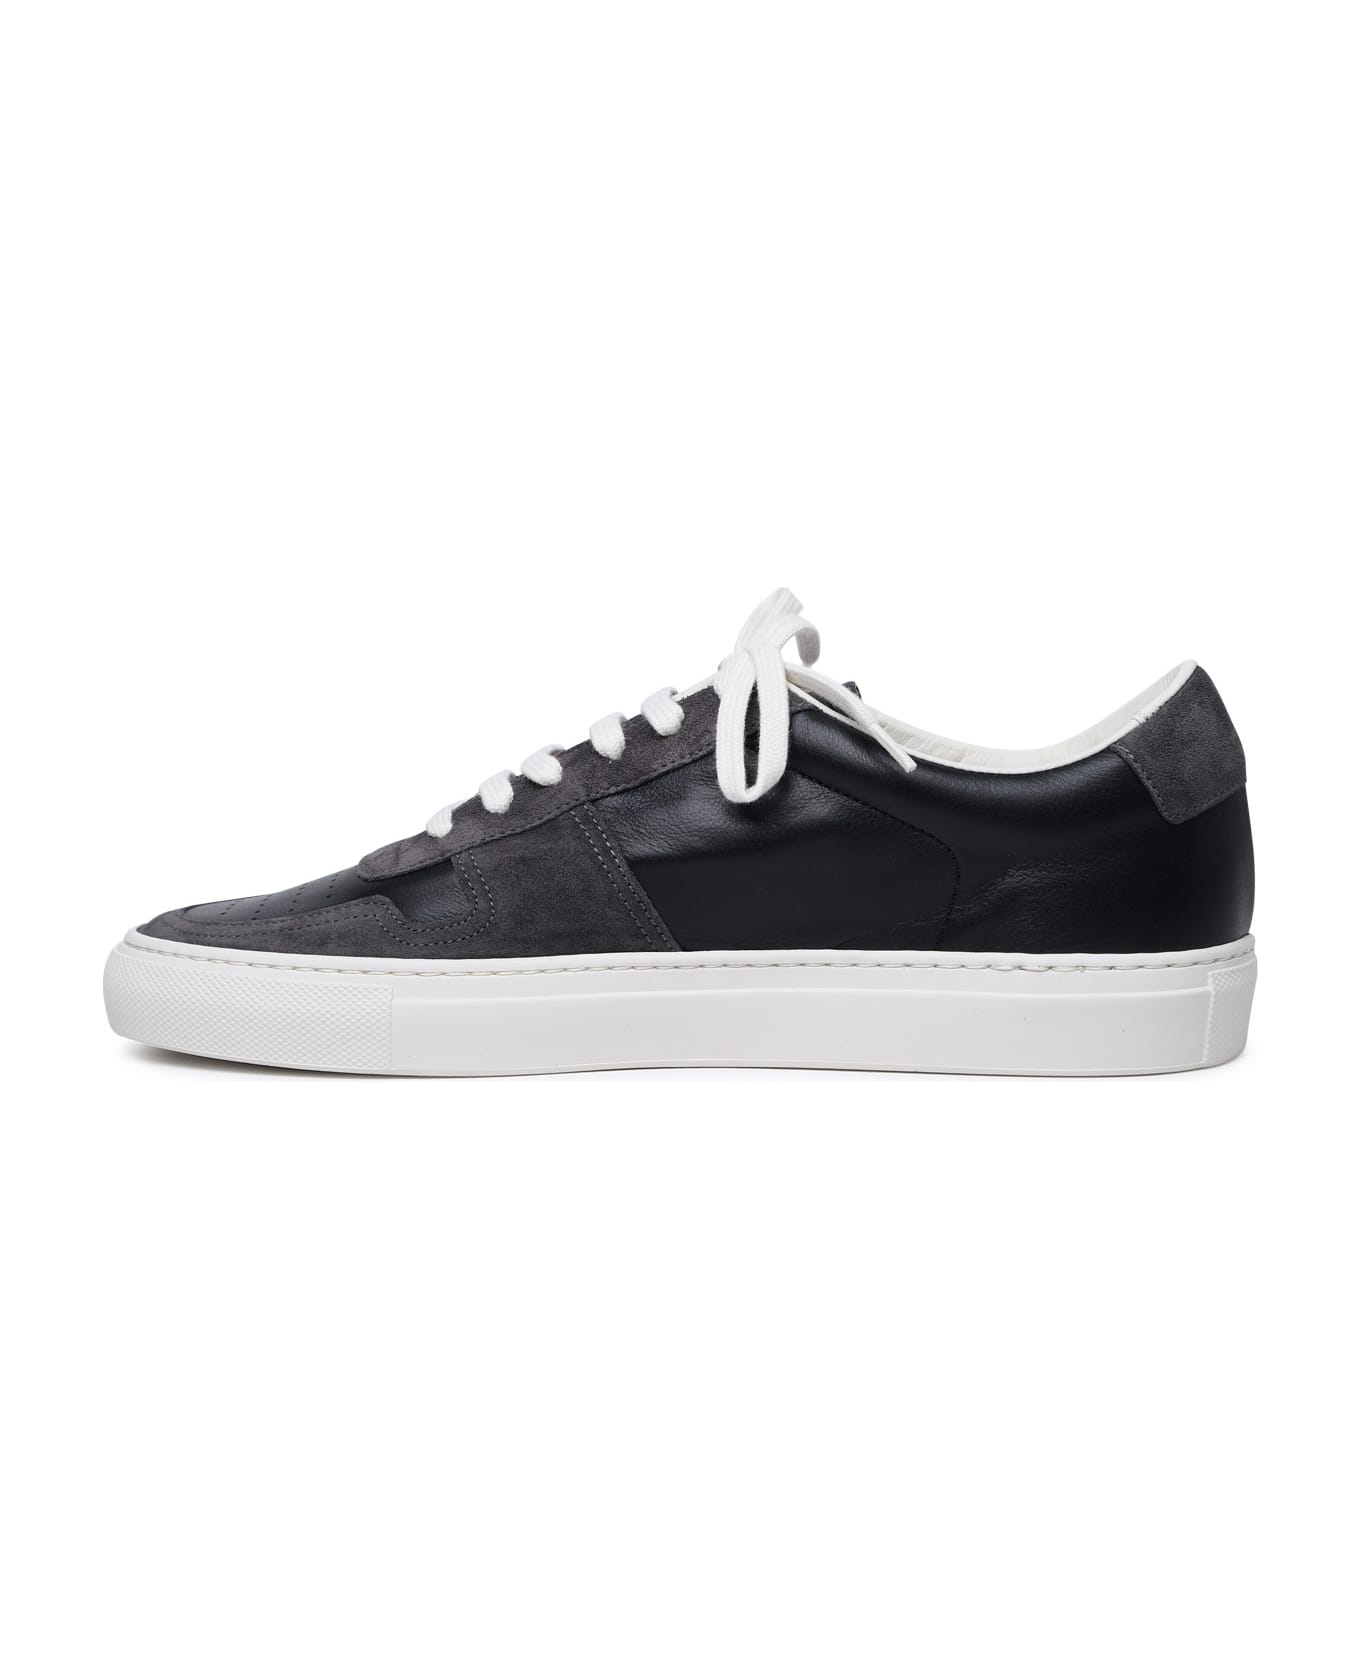 Common Projects 'bball Duo' Black Leather Sneakers - Black